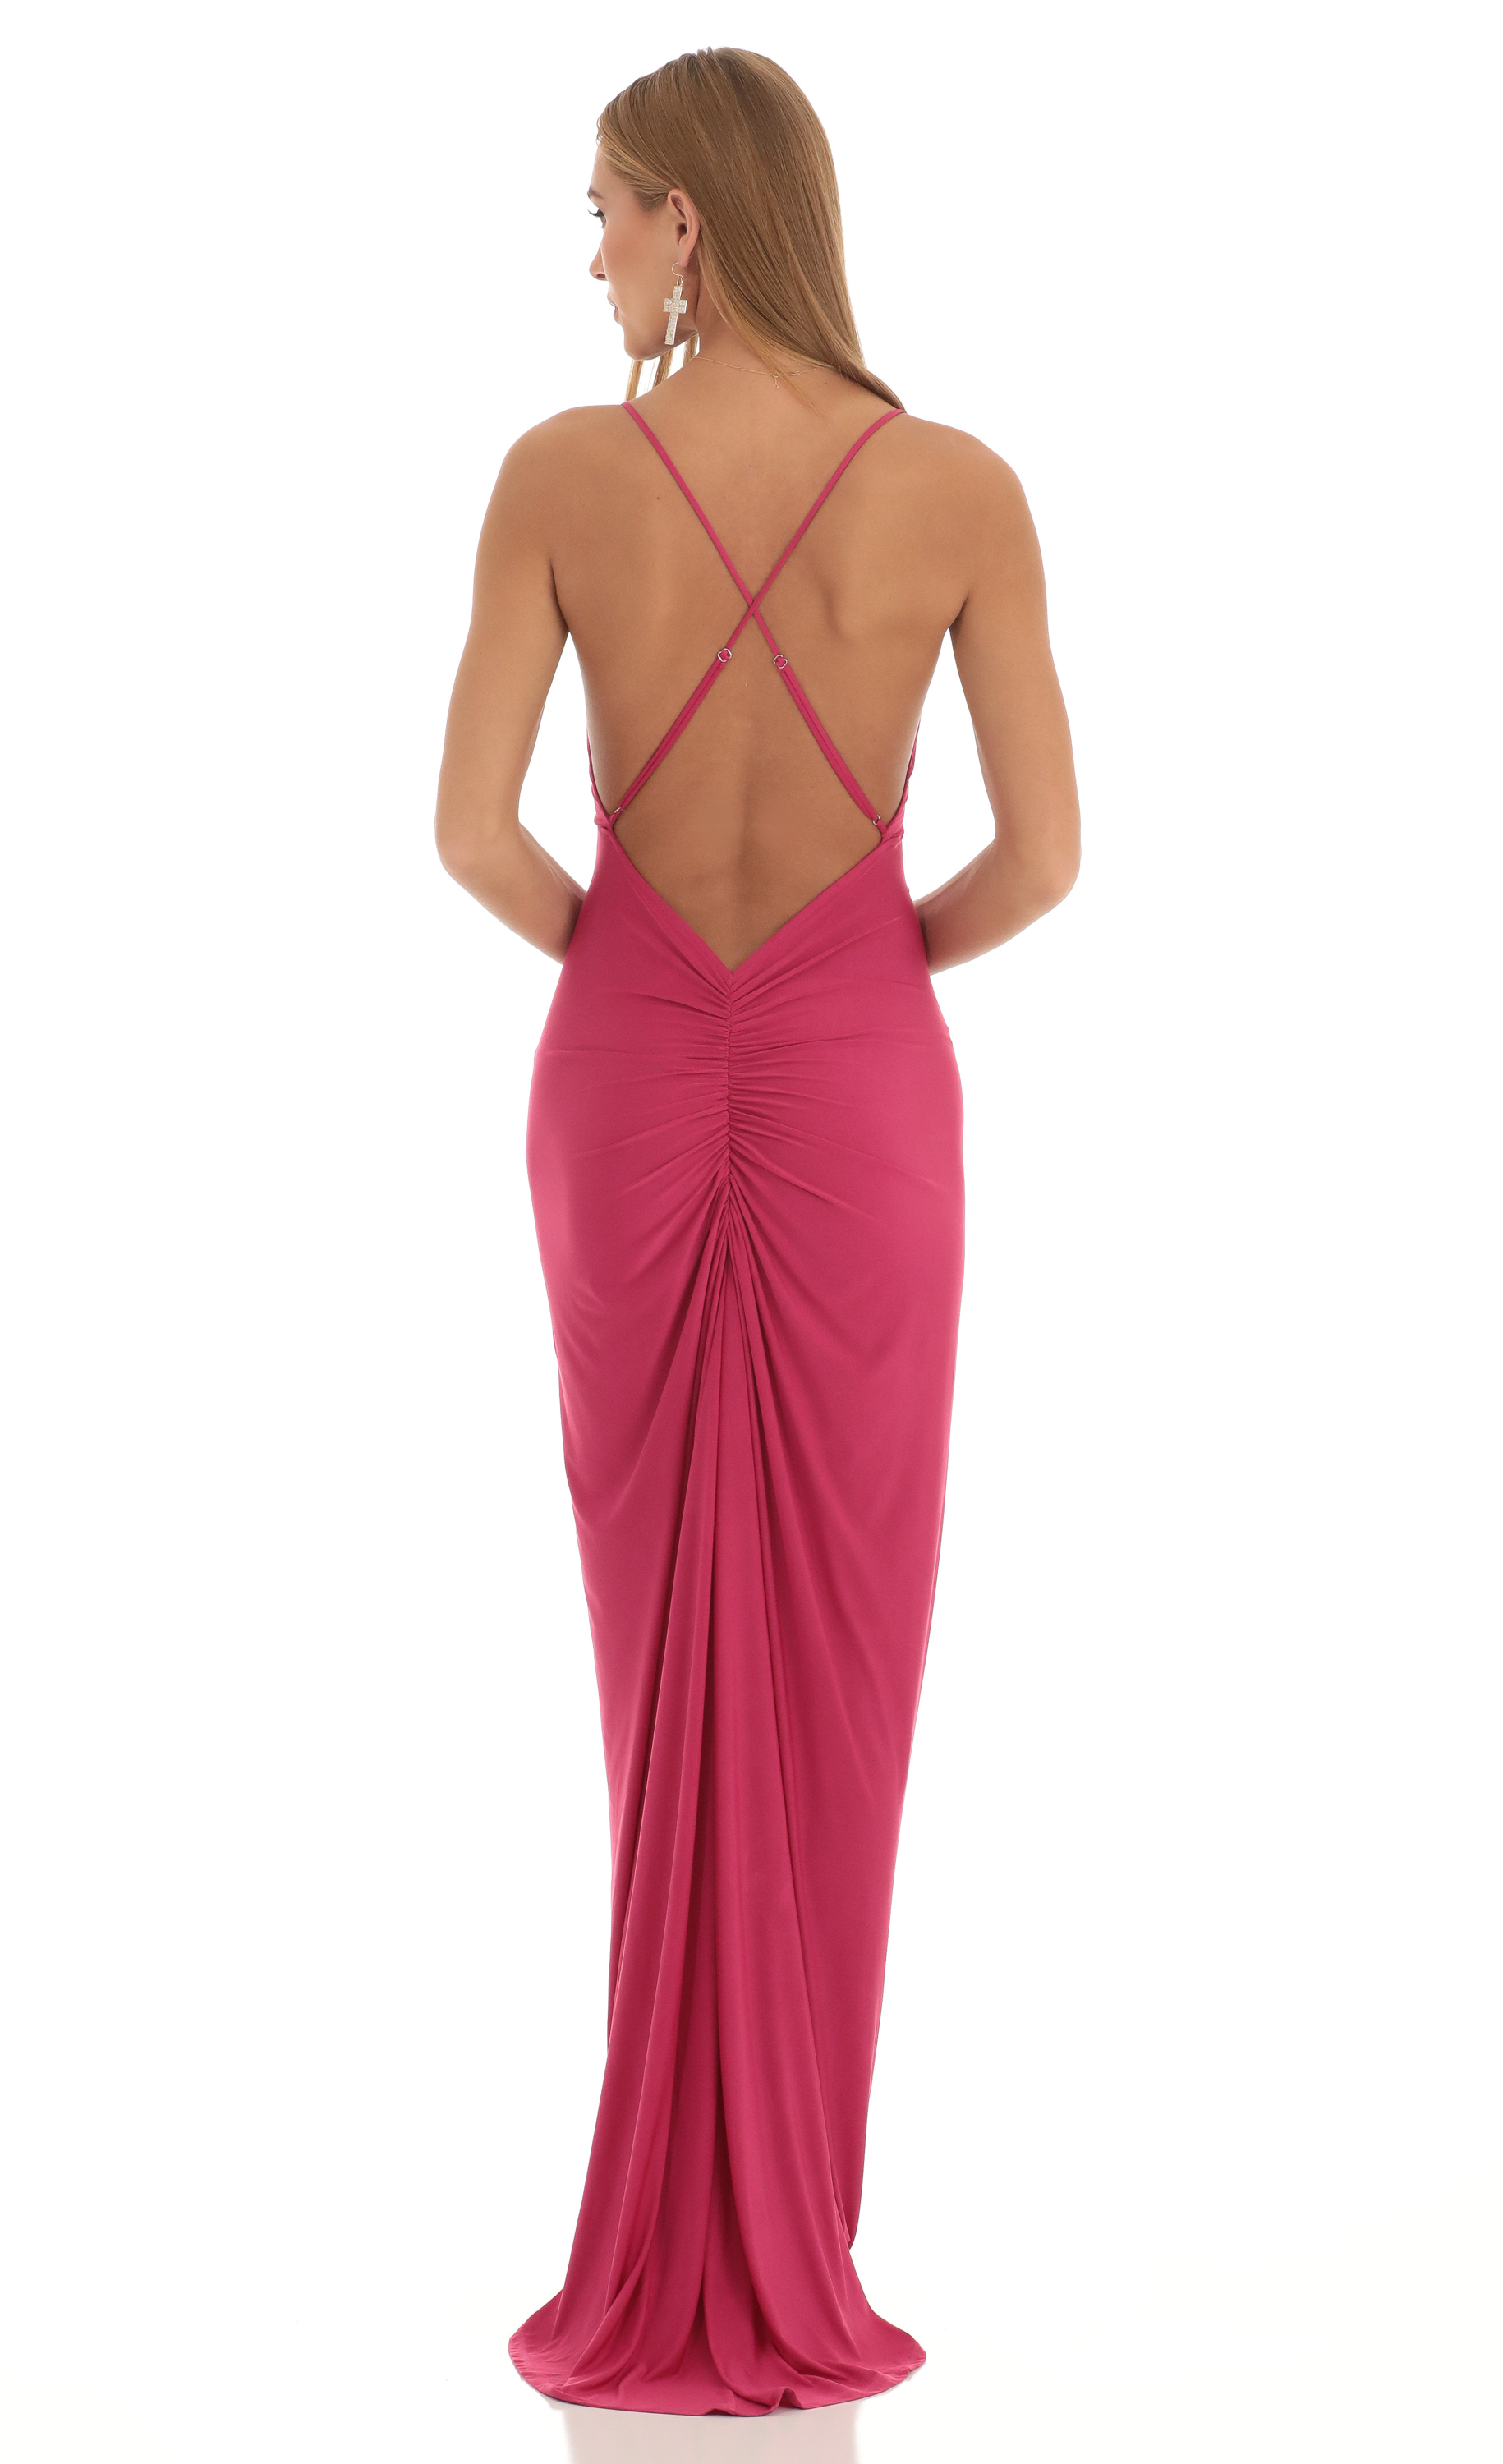 Gathered Cross Back Maxi Dress in Hot Pink